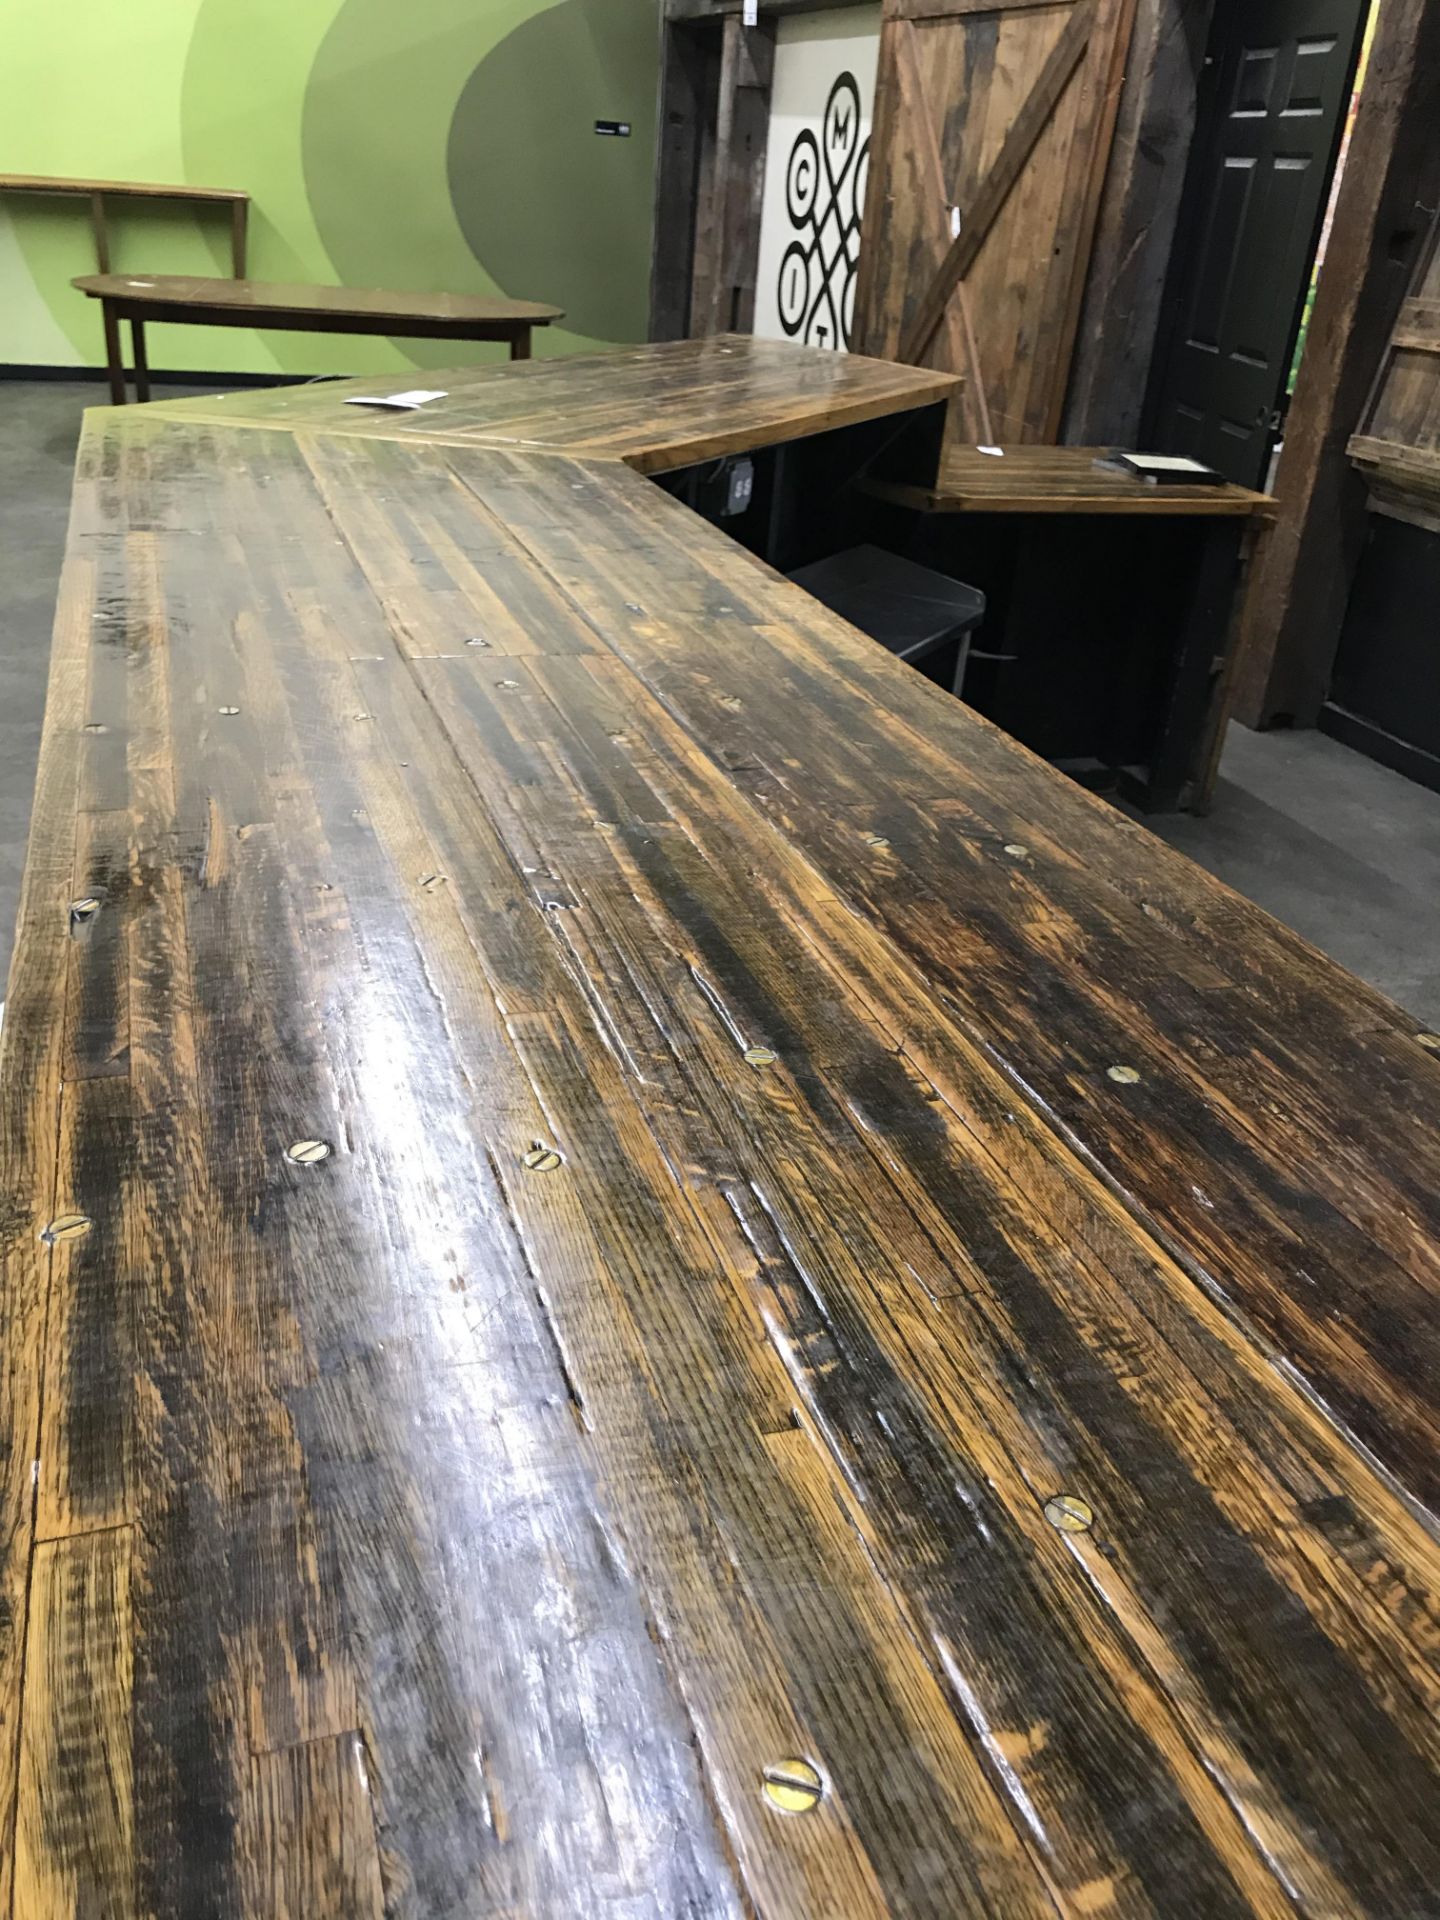 Reclaimed Wood Bar Top Dimensions in Picture (NO BASE) - Image 3 of 5